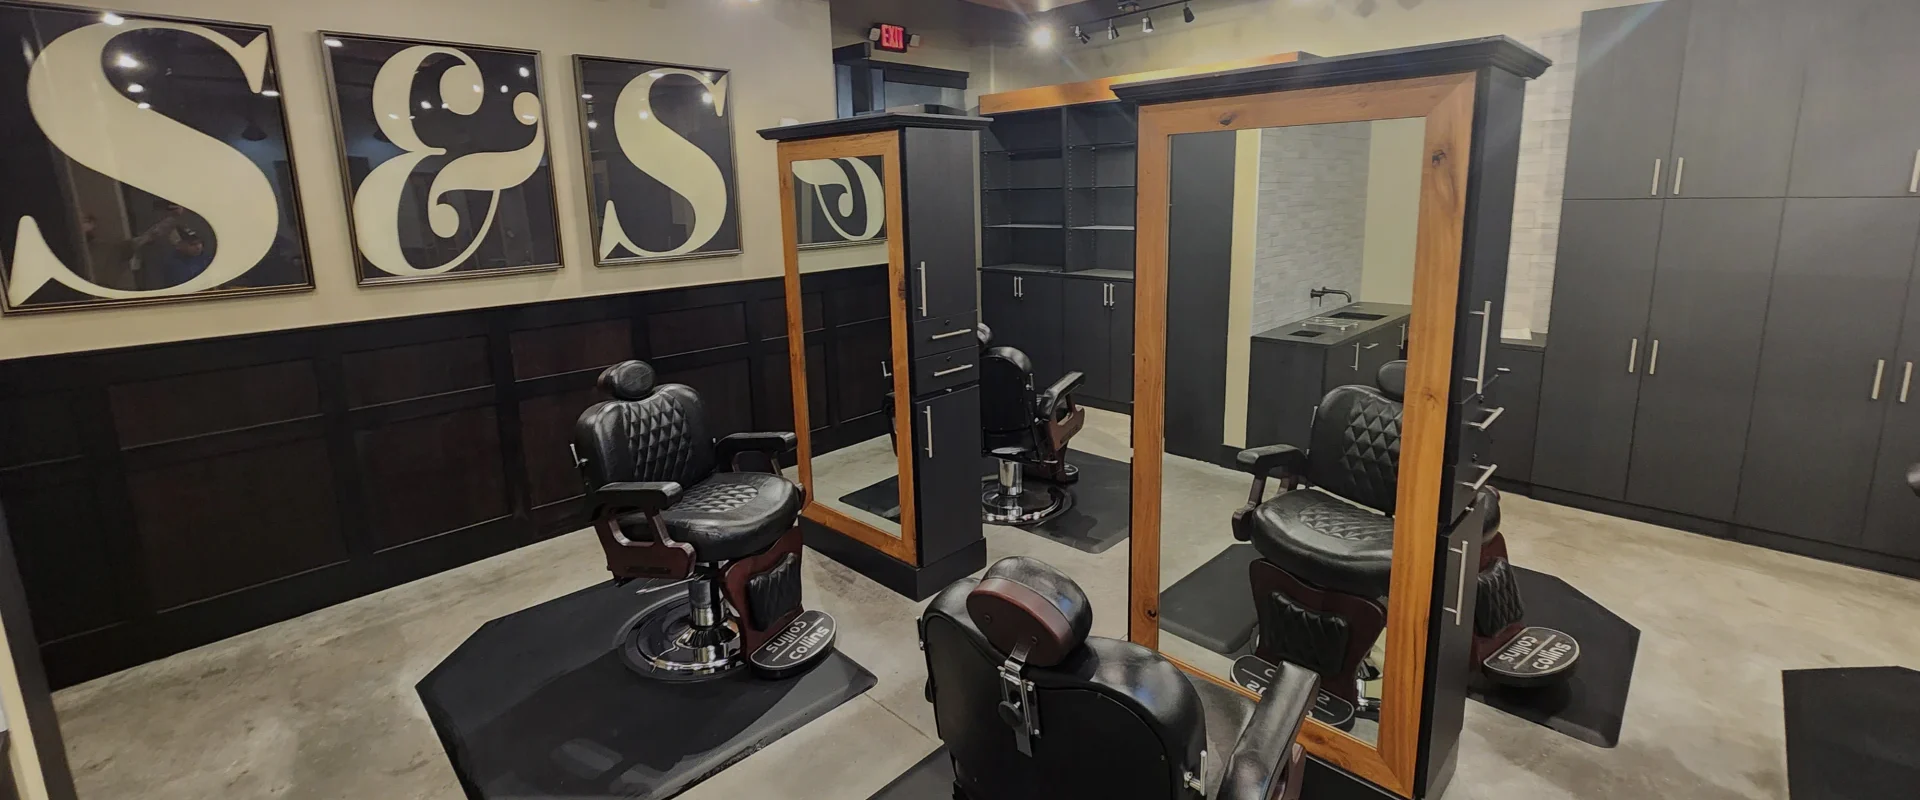 interior view of a barbershop with electrical installation